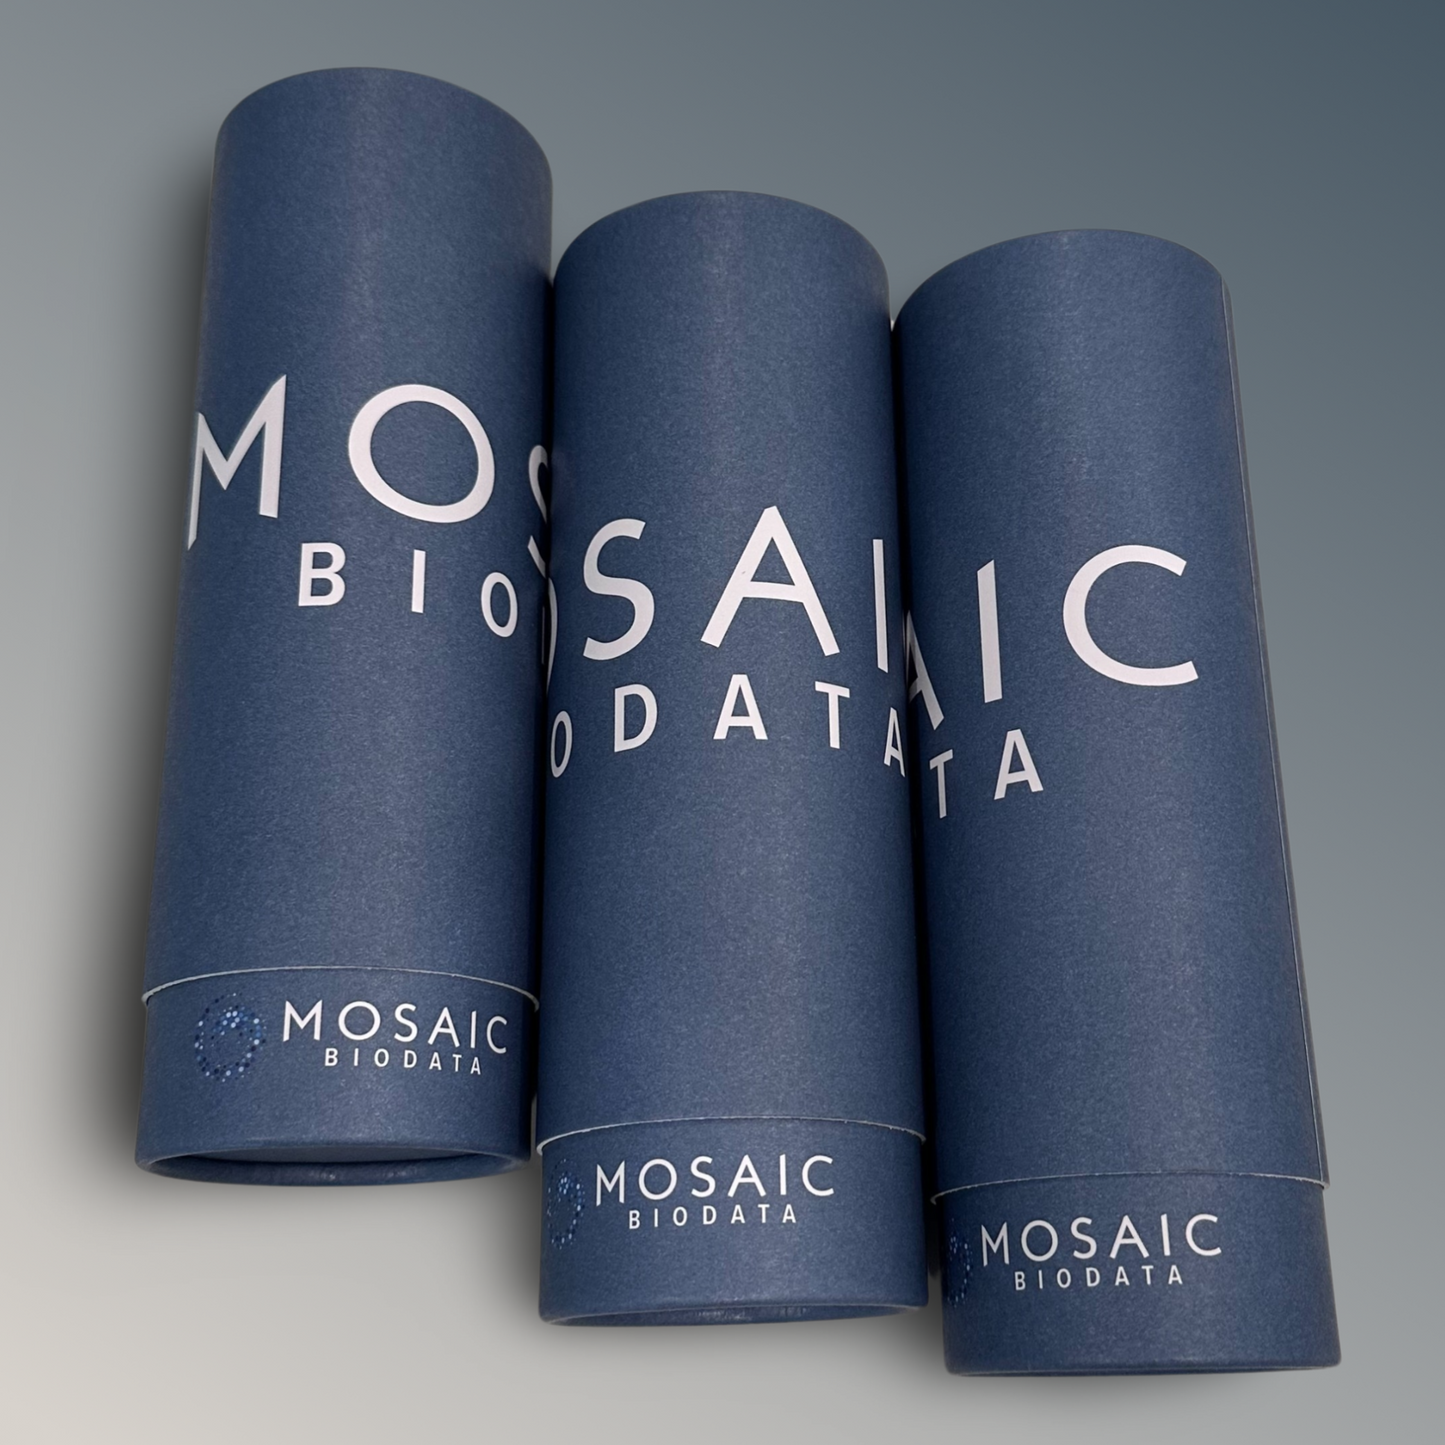 Mosaic Genetic Test Kit and Comprehensive Report